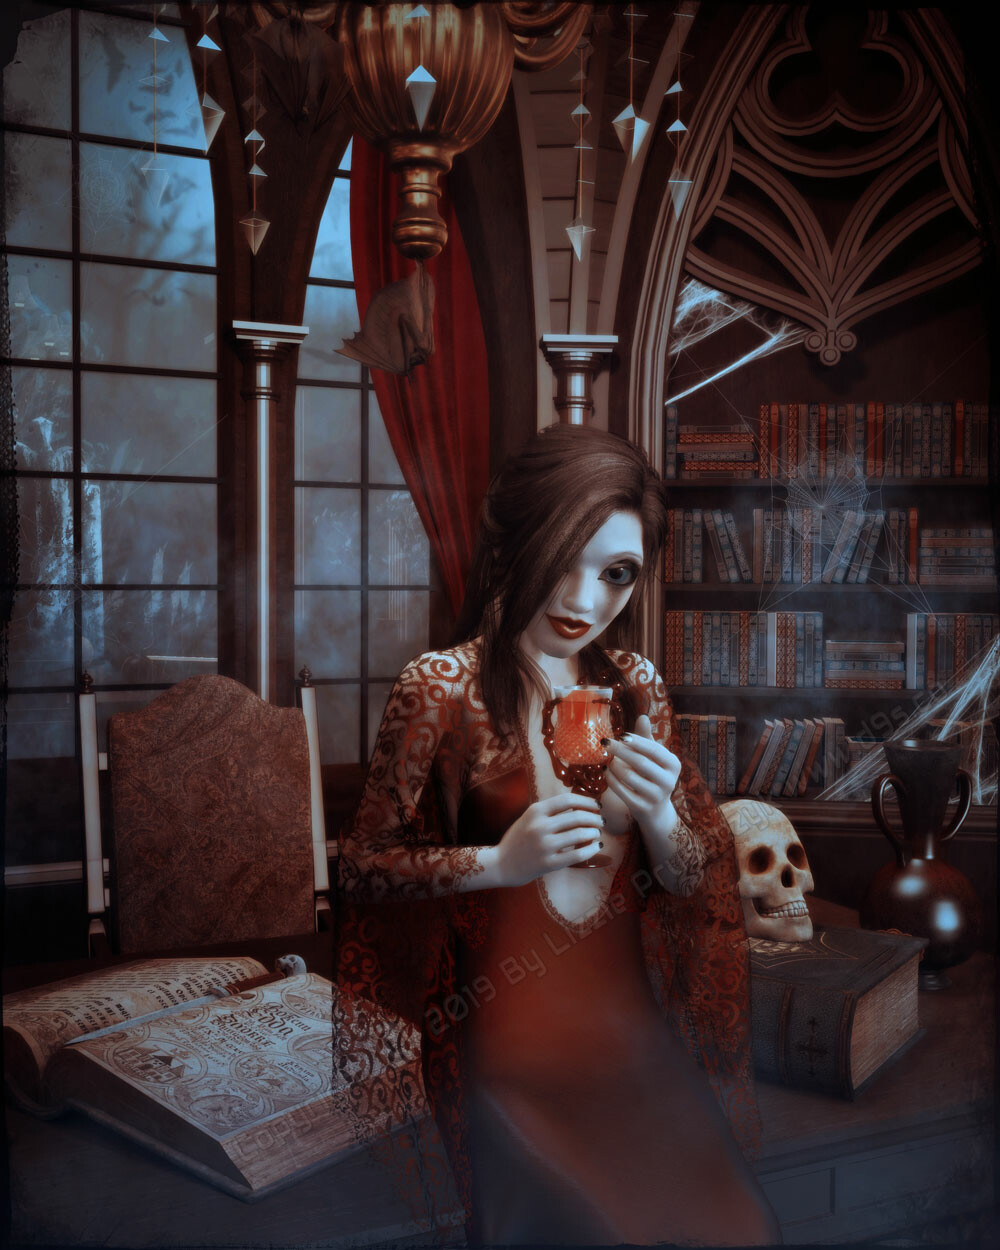 A an old gothic horror style scene featuring Lilla the Goth Doll.